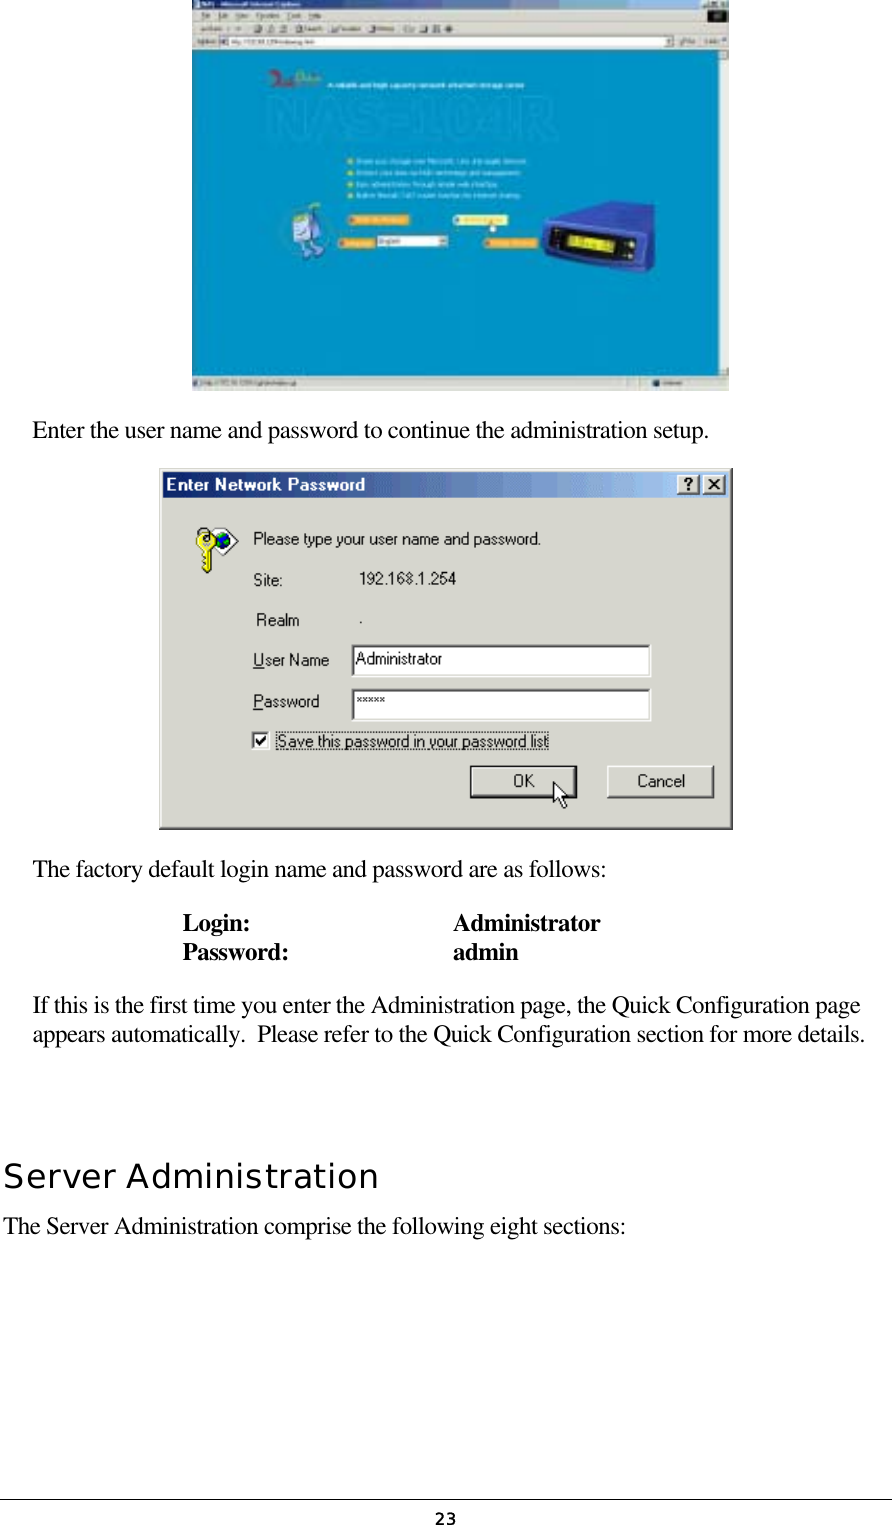   23  Enter the user name and password to continue the administration setup.  The factory default login name and password are as follows: Login:   Administrator Password:   admin If this is the first time you enter the Administration page, the Quick Configuration page appears automatically.  Please refer to the Quick Configuration section for more details.  Server Administration The Server Administration comprise the following eight sections: 